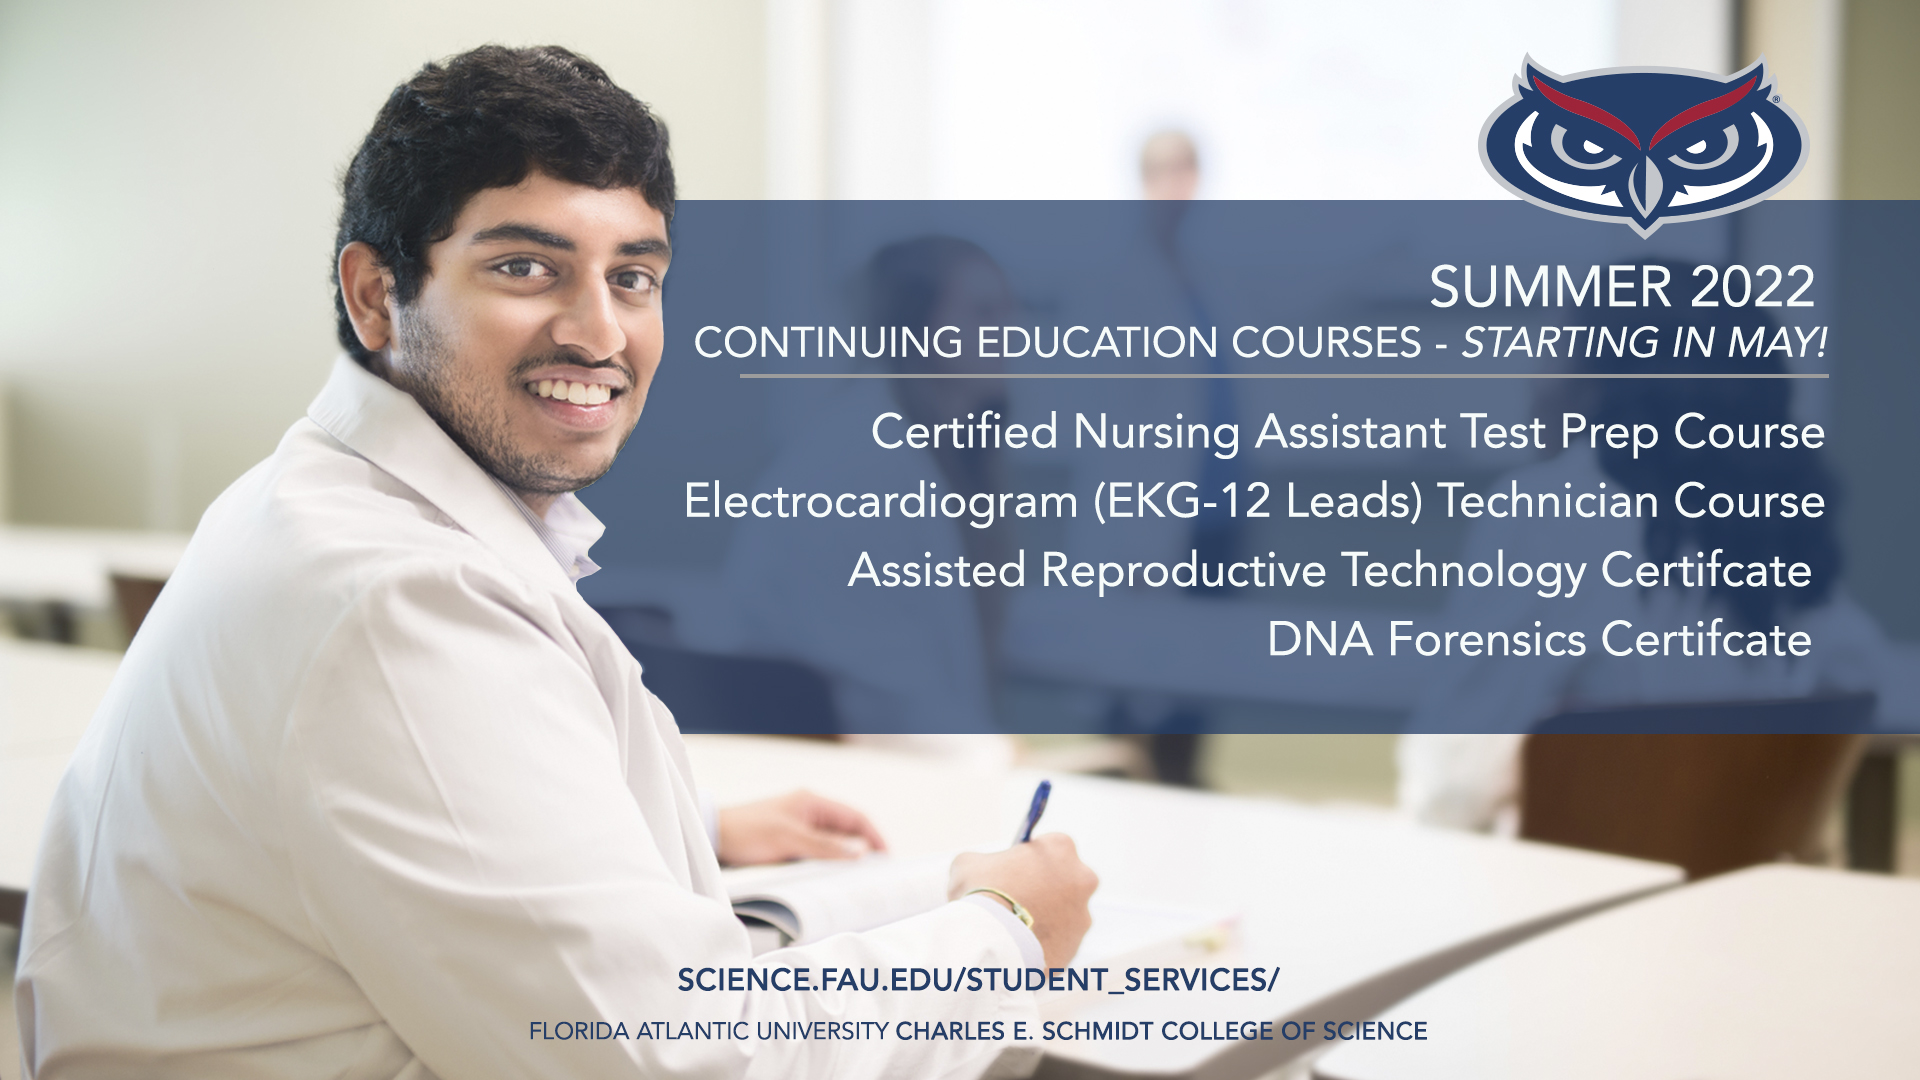 Summer 2022 Continuing Education Courses